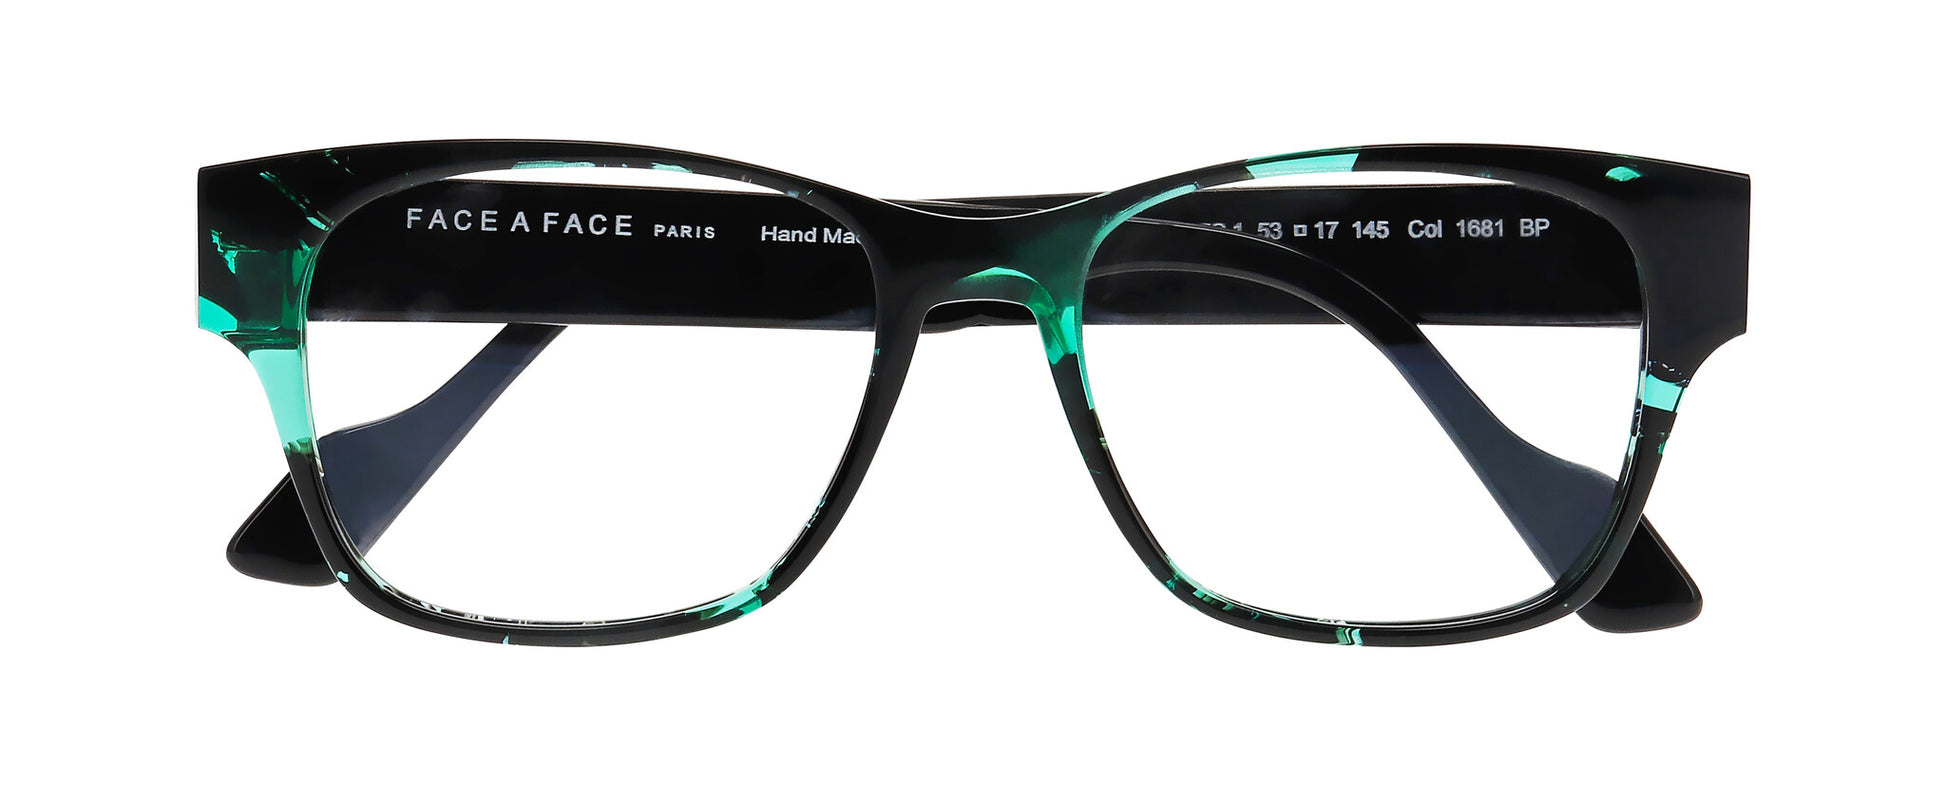 Men's prescription eyewear – A front view of a square acetate frame that is black and clear green tortoise in colour